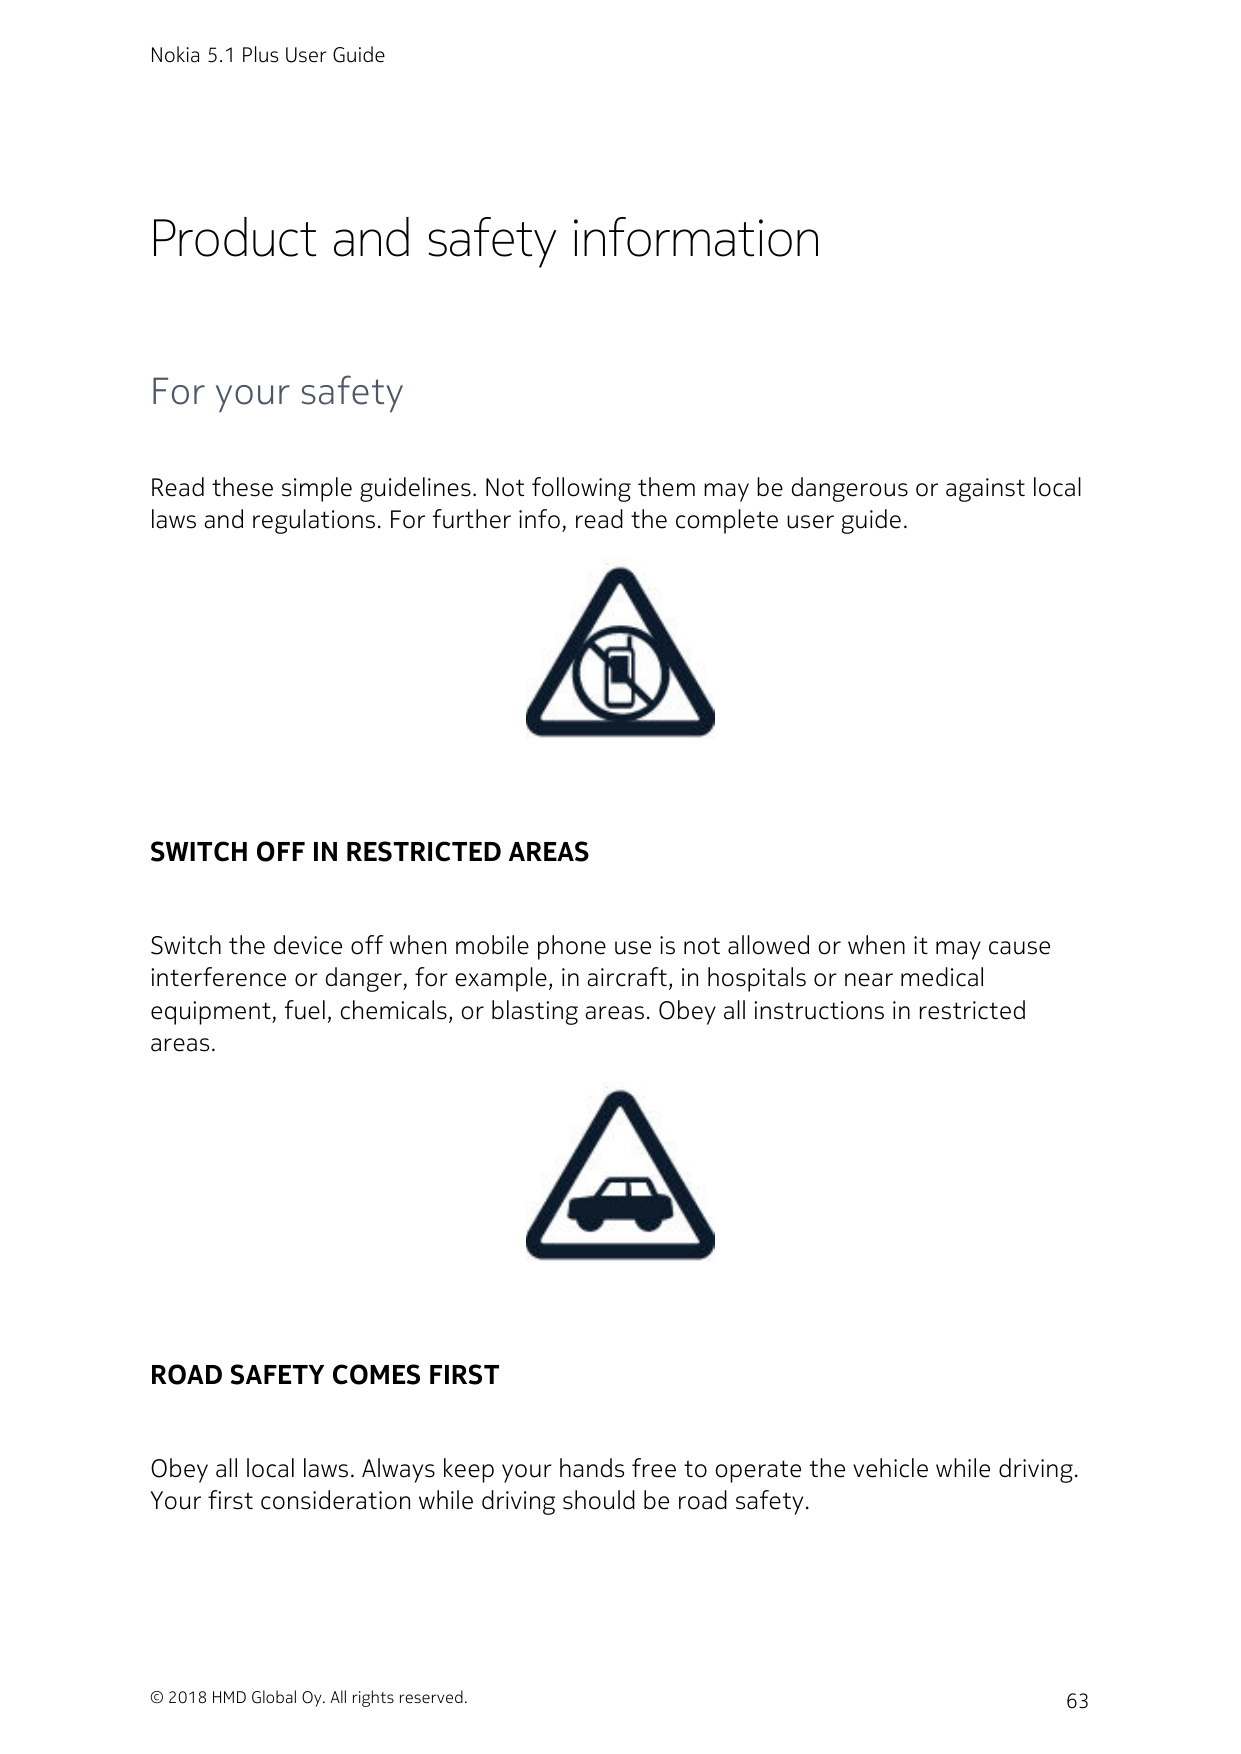 Nokia 5.1 Plus User GuideProduct and safety informationFor your safetyRead these simple guidelines. Not following them may be da